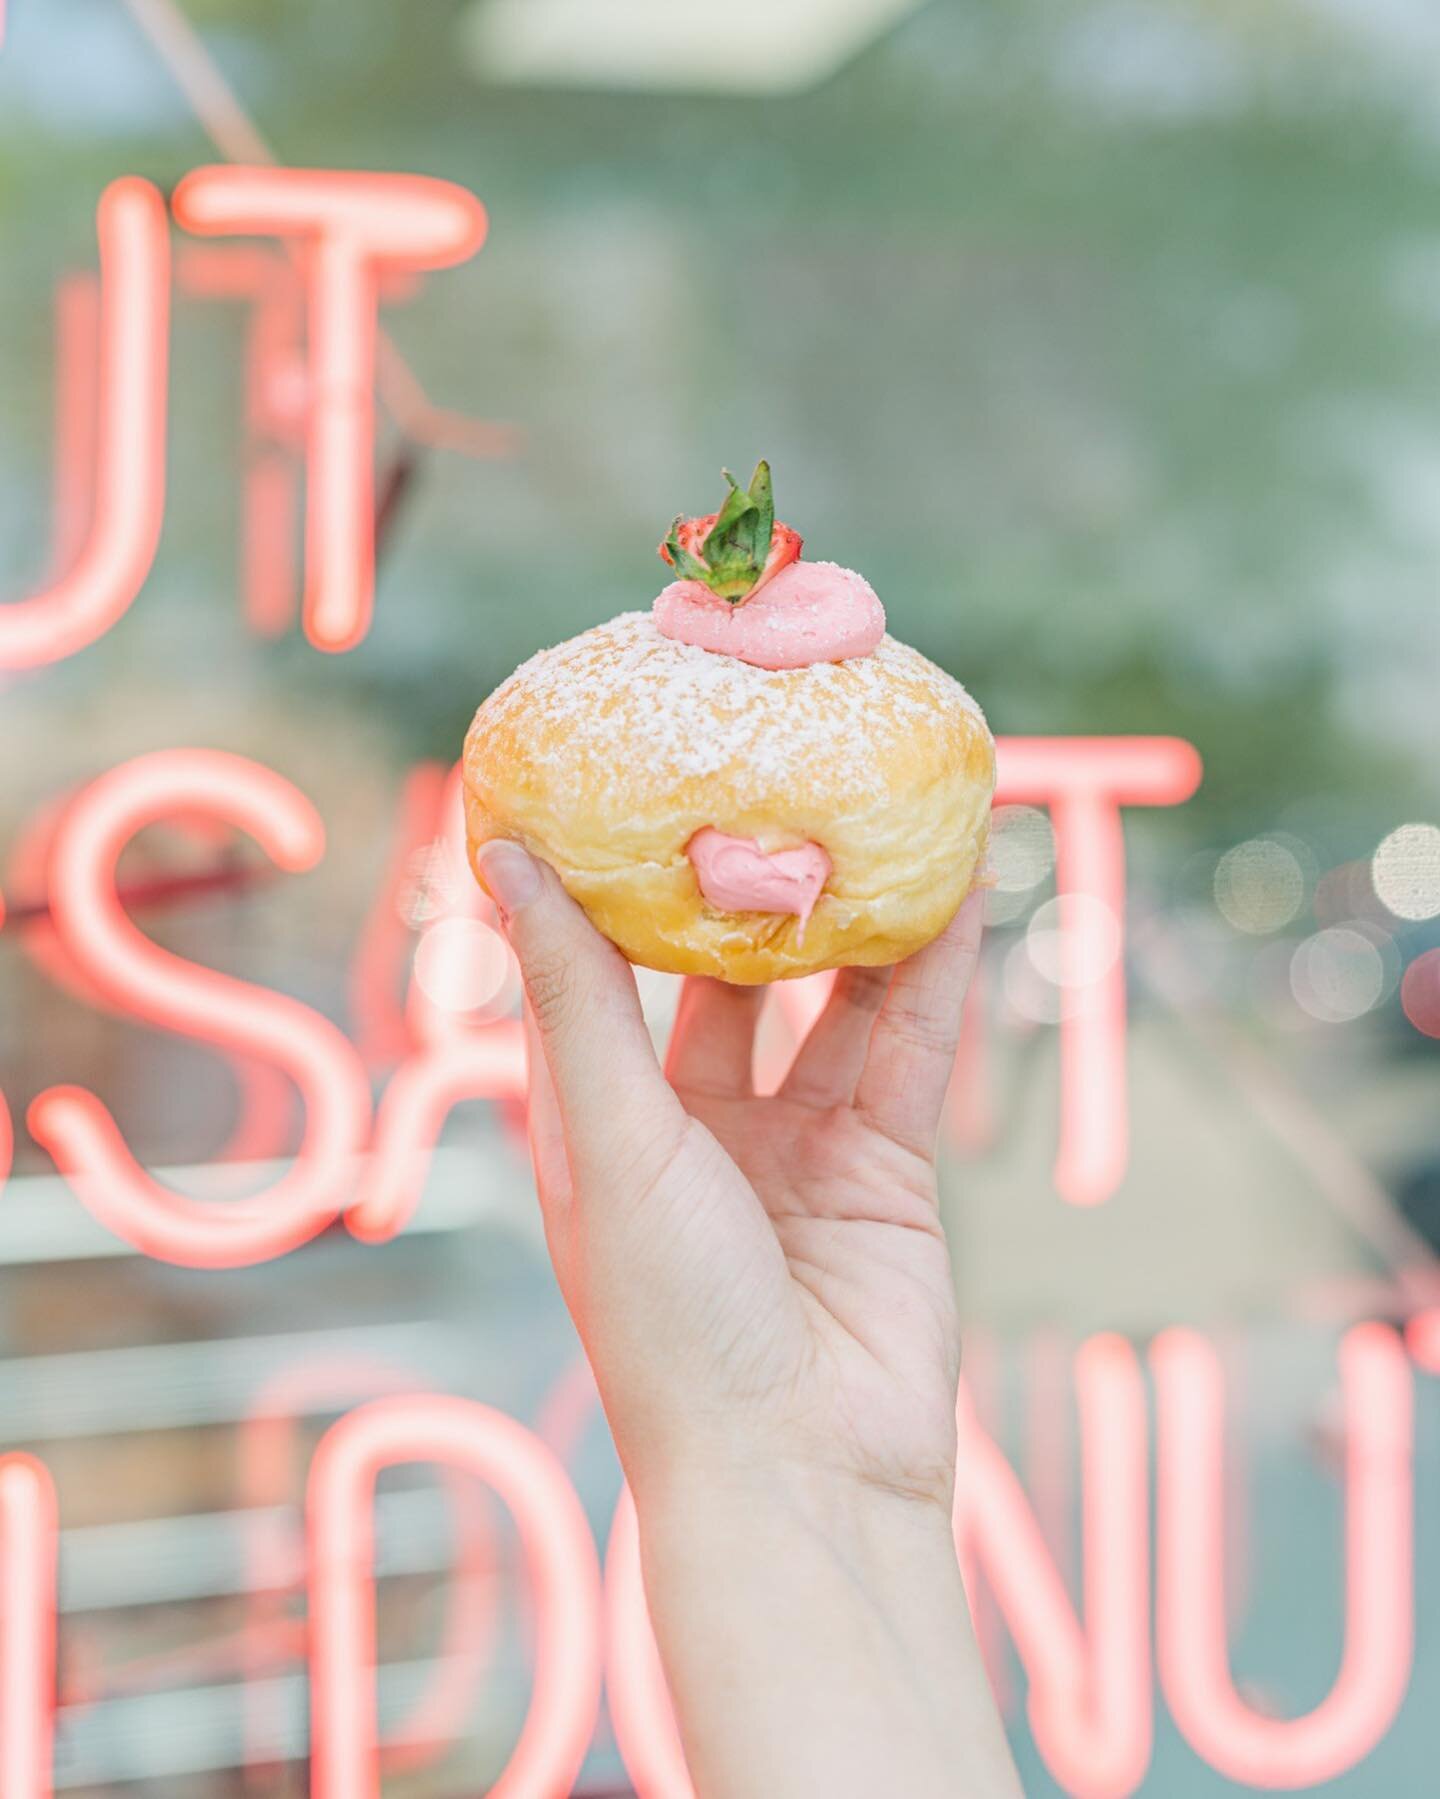 You can sit with us, but we can't promise we'll share our Strawberry Delight donut! 🍰

Stop by WOW and get your own!
Monday - Saturday | 8:00AM - 10:00PM
Sunday | 8:00AM - 8:00PM